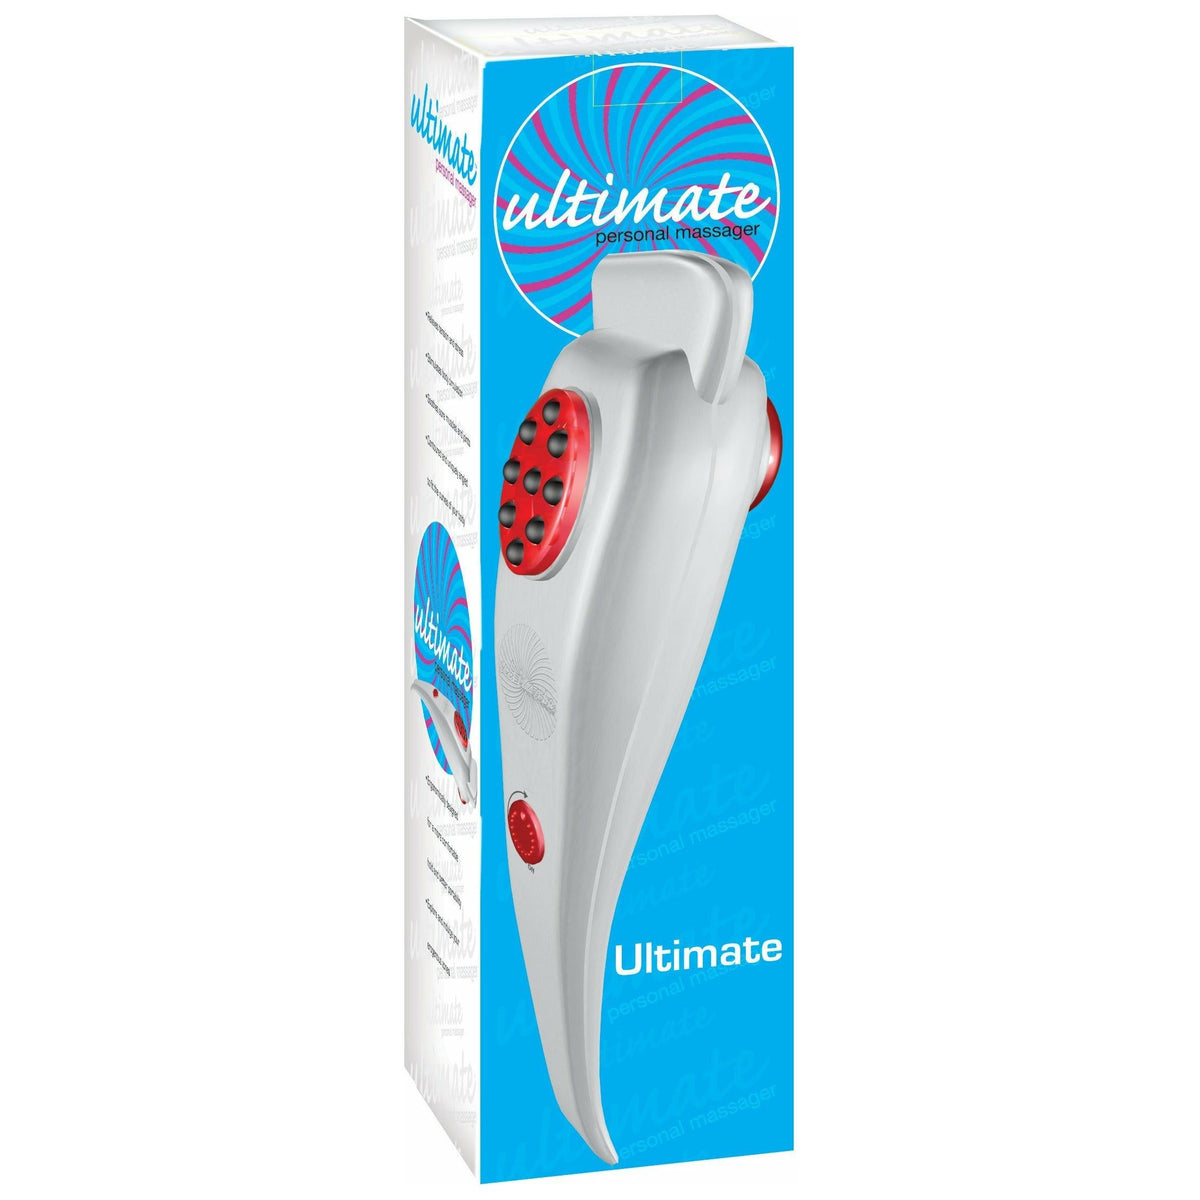 Ultimate Personal Massager